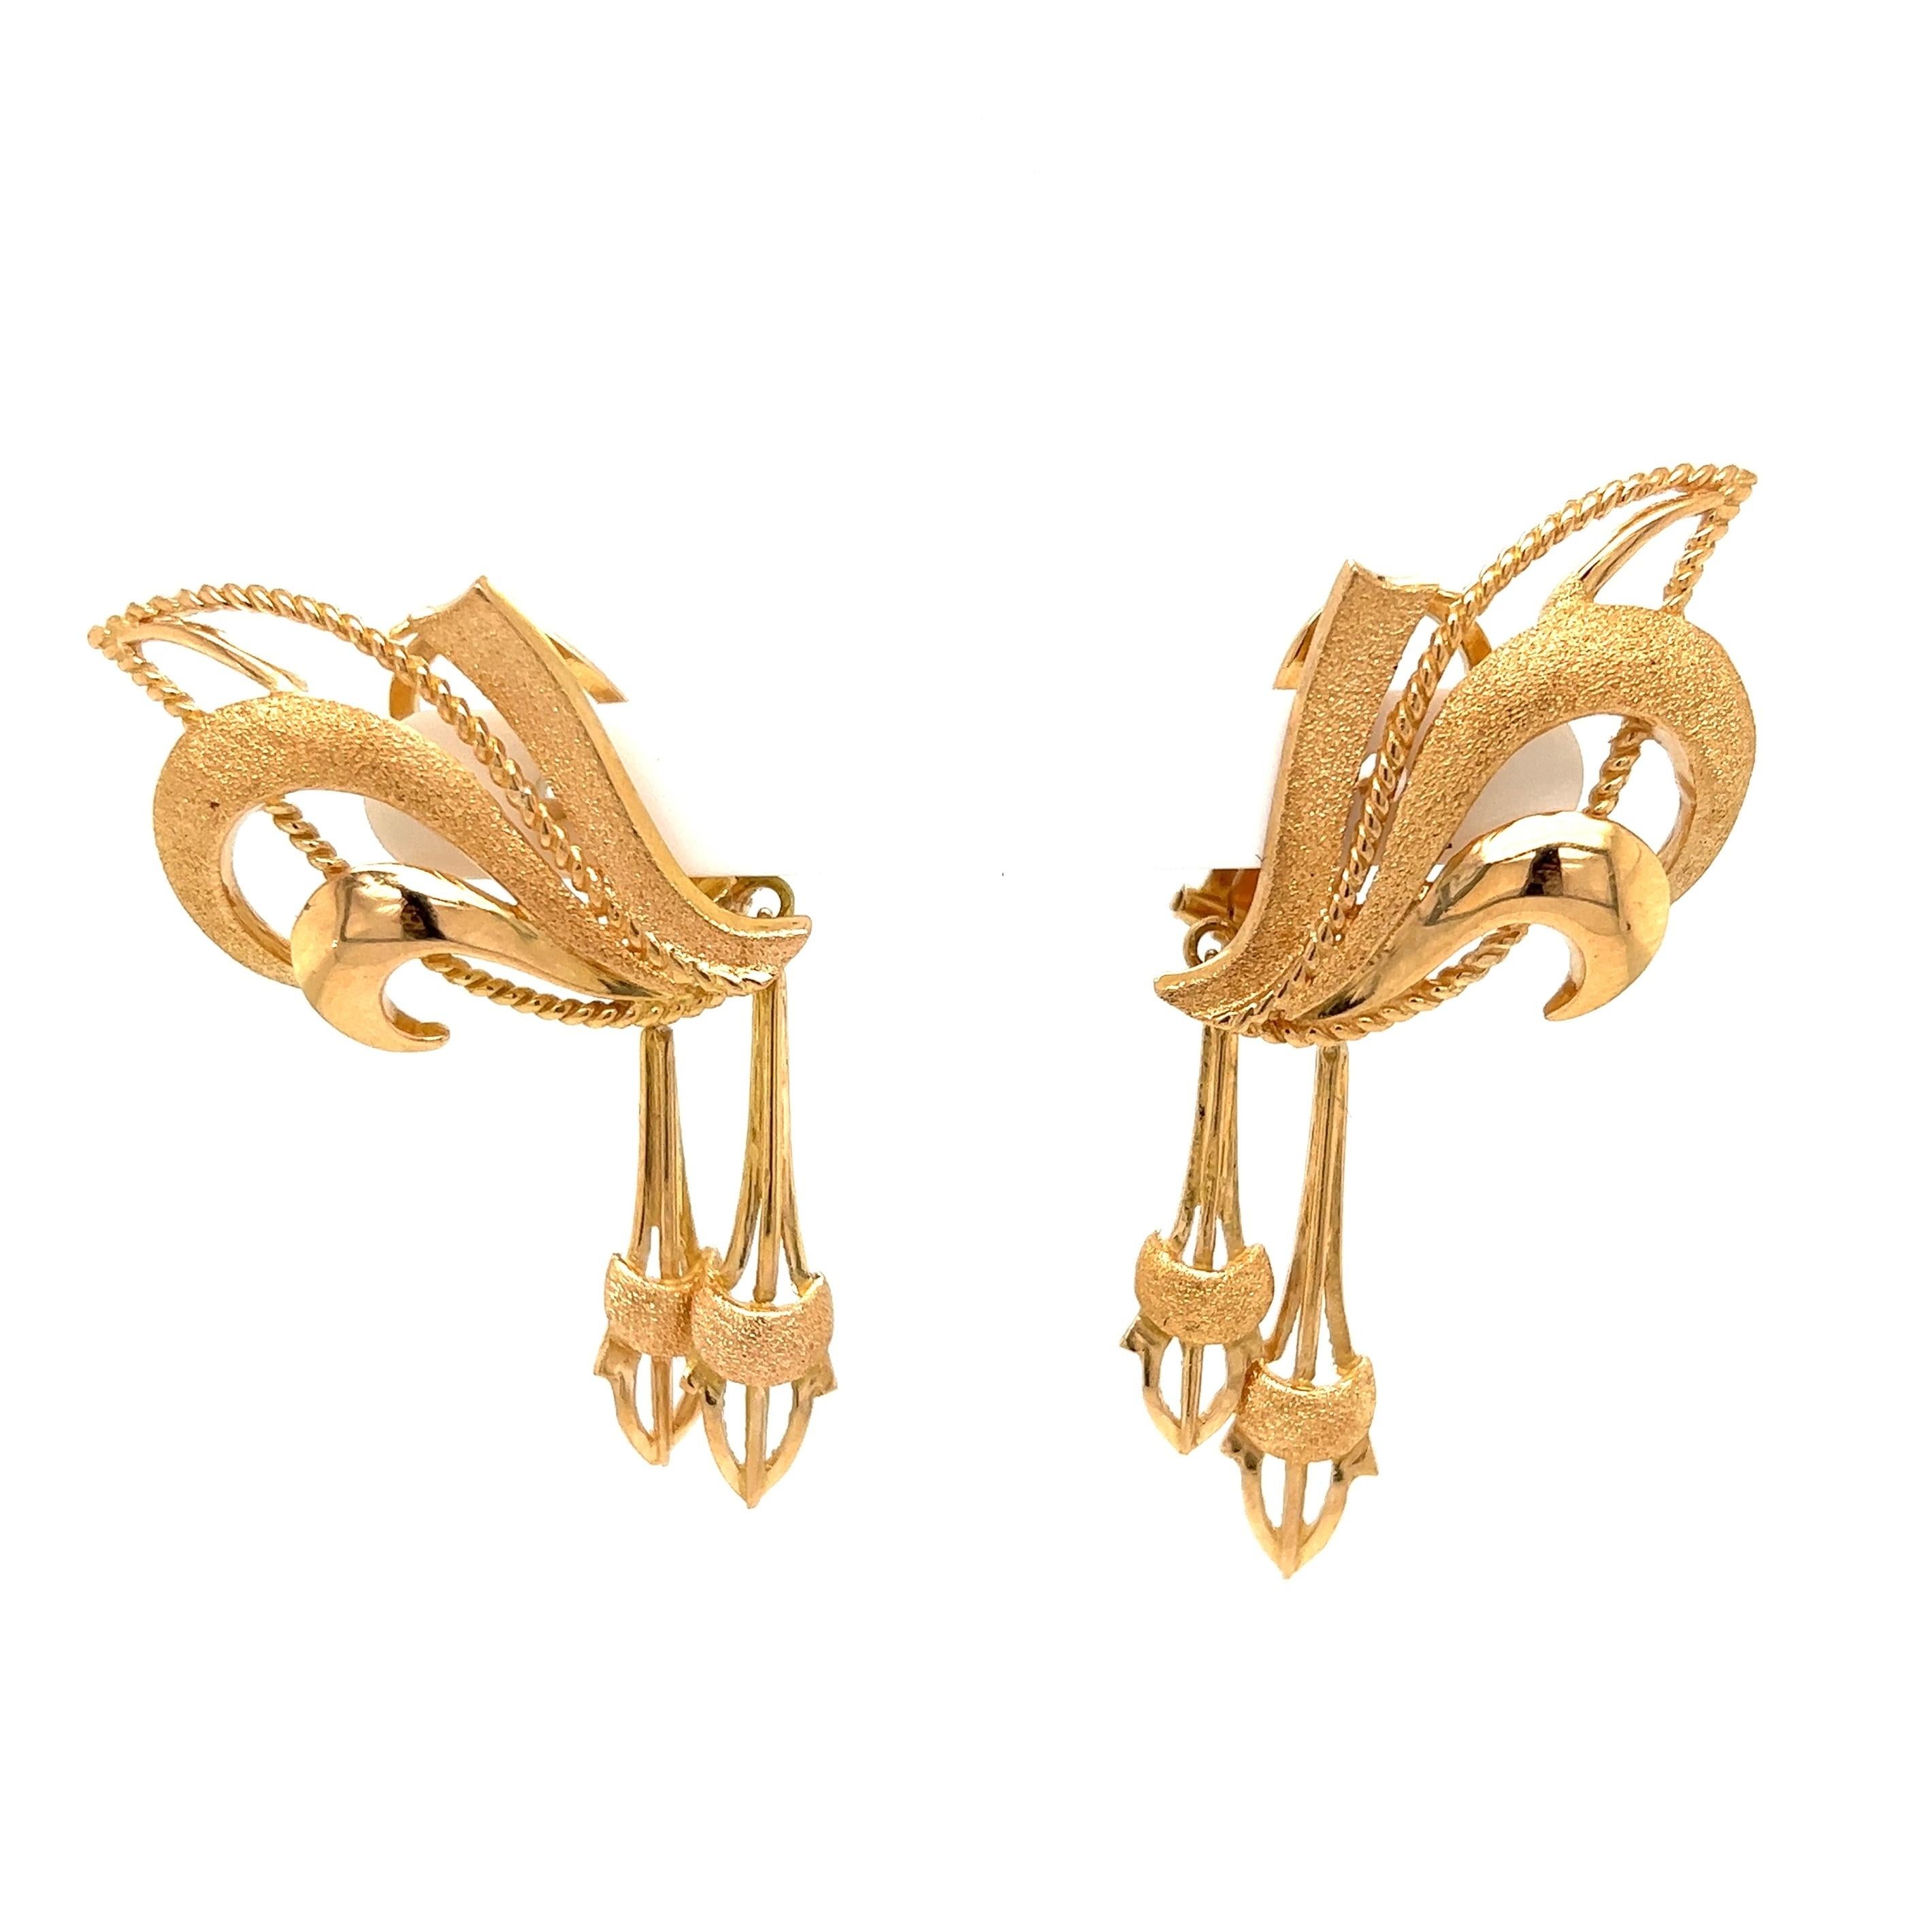 Beautiful and Stylish Retro Gold Earrings. Hand crafted in 18 Karat Rose Gold. Approx. 2.3